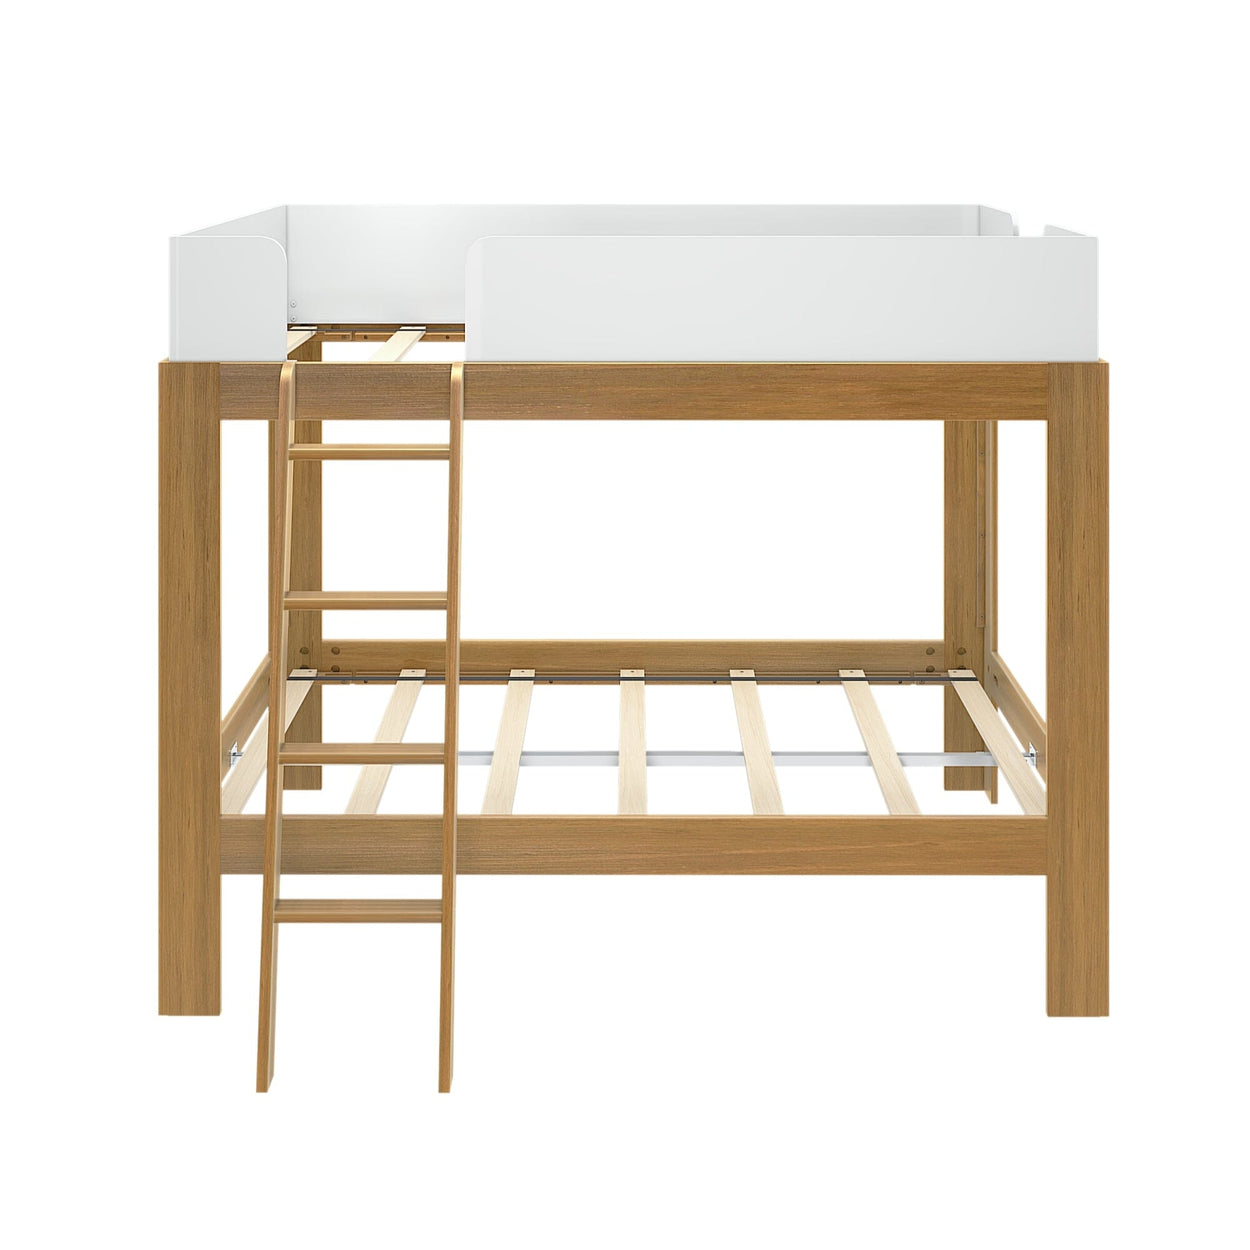 200251-527 : Bunk Beds Mid-Century Modern Full over Full Bunk Bed, White/Pecan